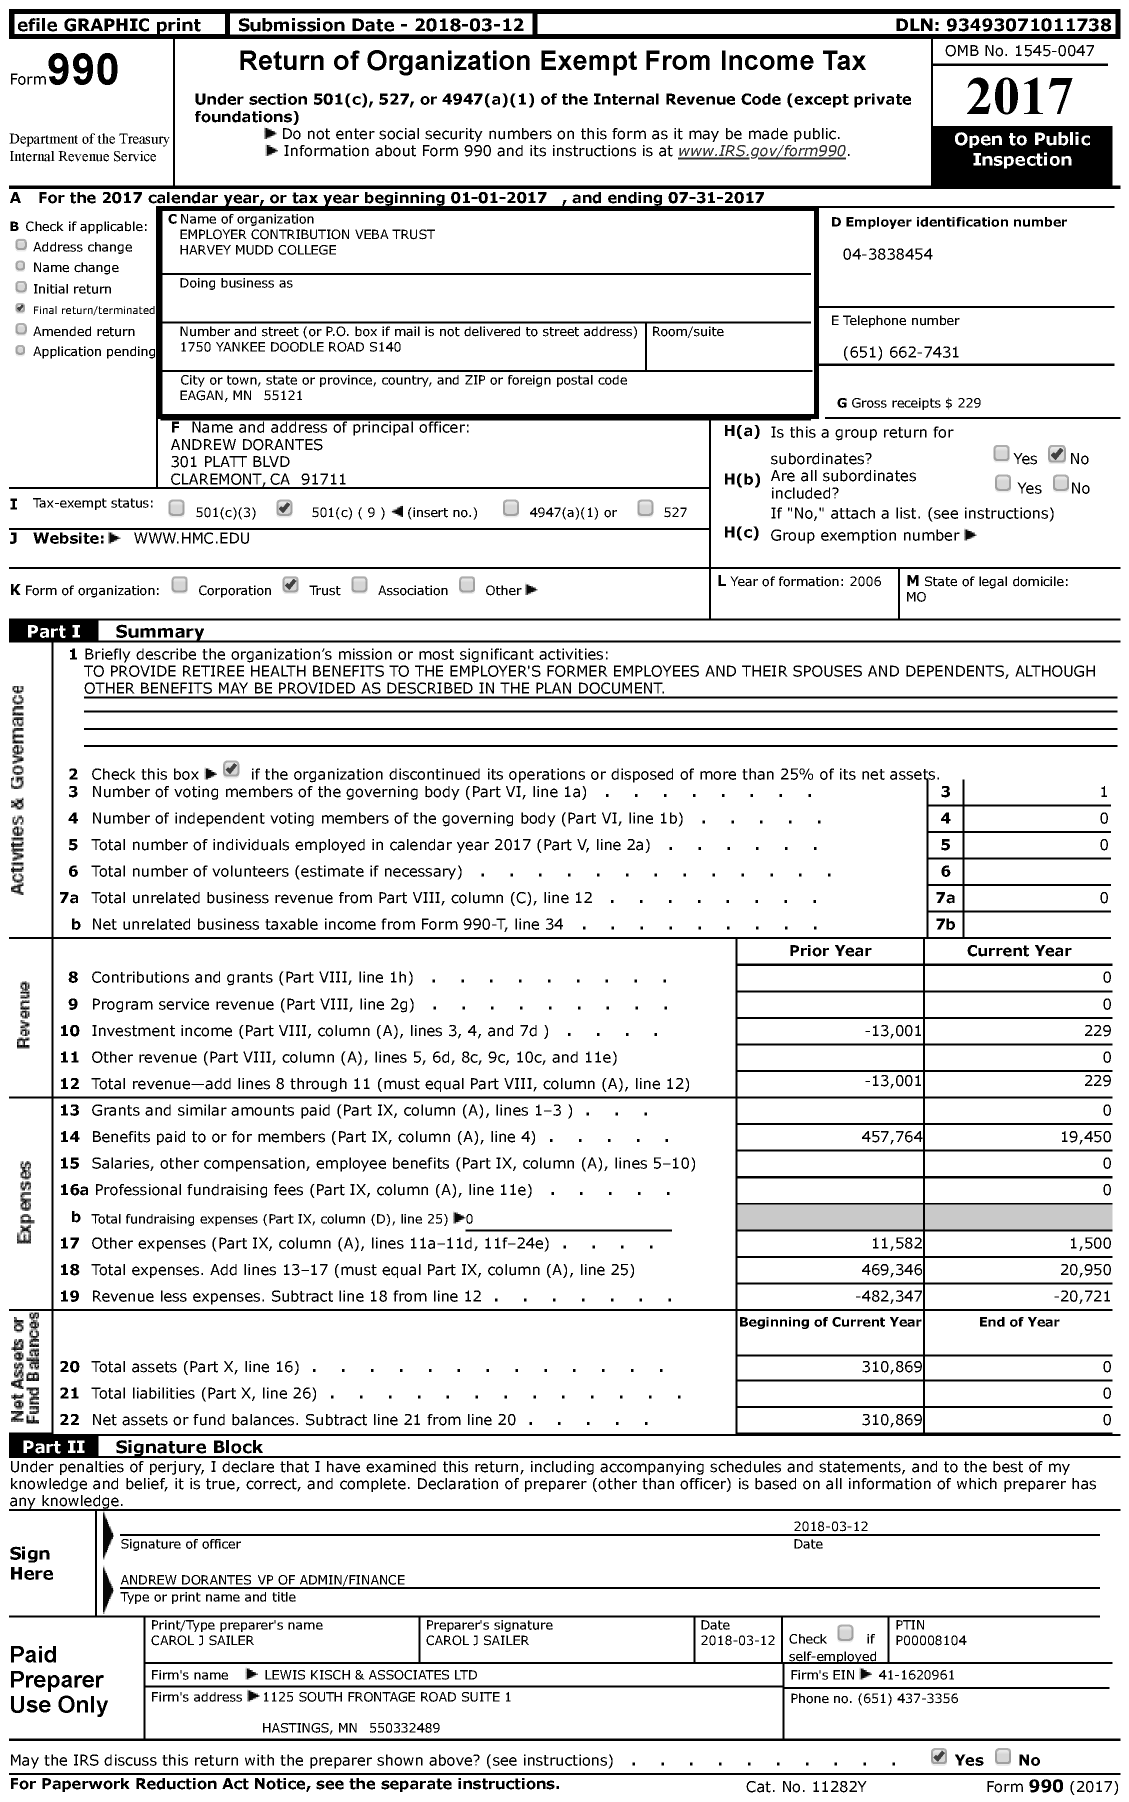 Image of first page of 2016 Form 990 for Employer Contribution Veba Trust Harvey Mudd College